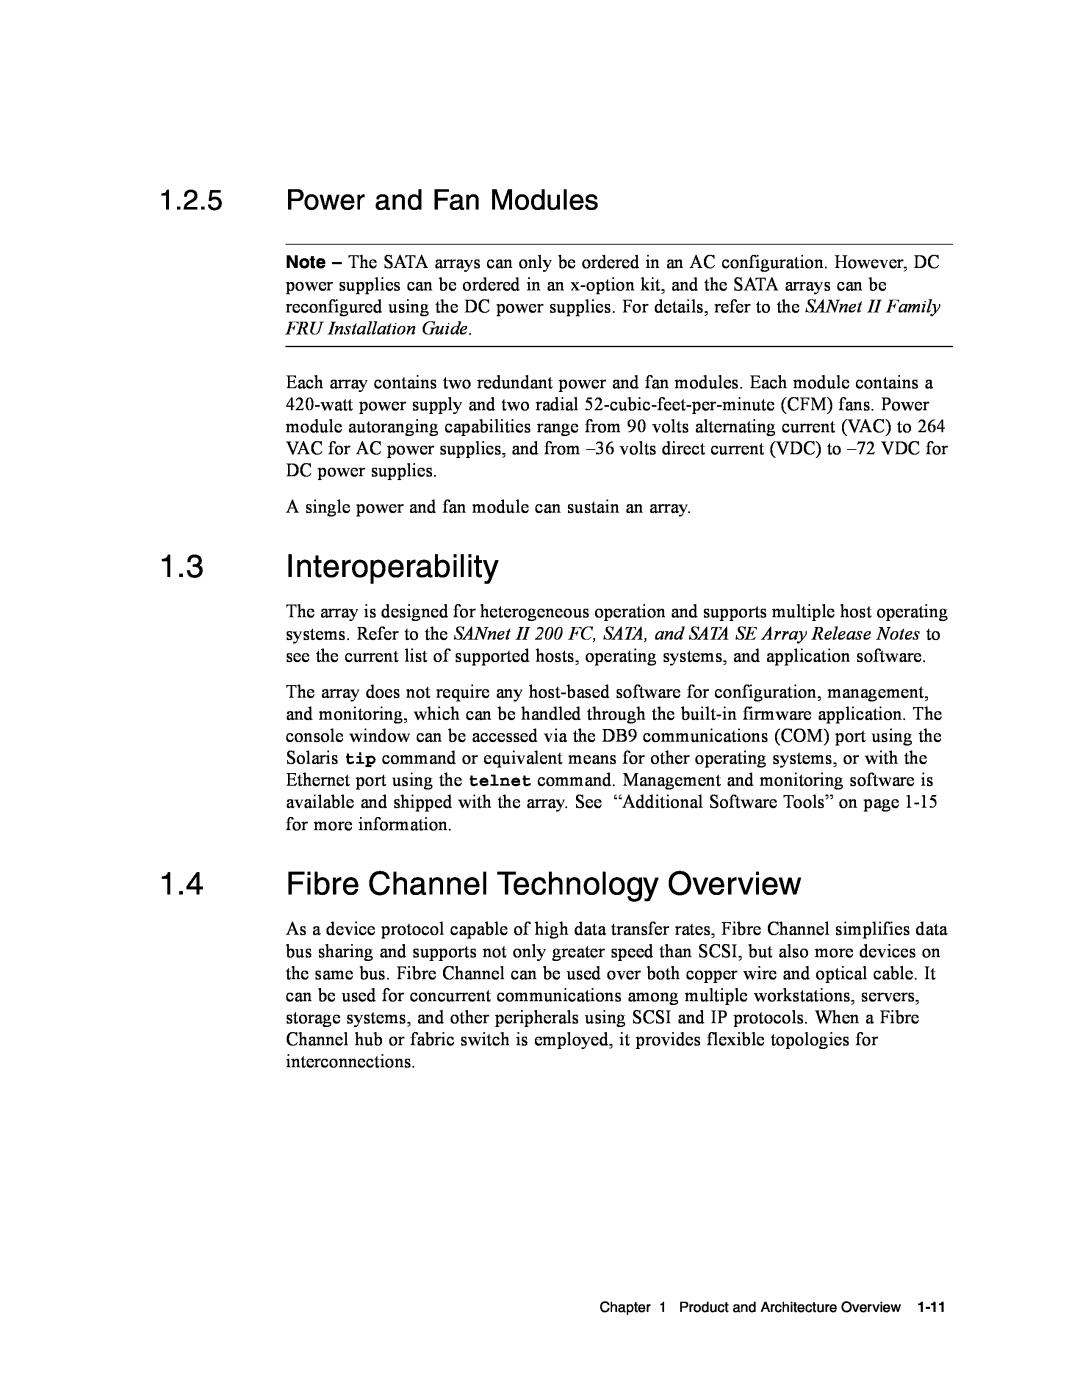 Dot Hill Systems II 200 FC service manual Interoperability, Fibre Channel Technology Overview, Power and Fan Modules 